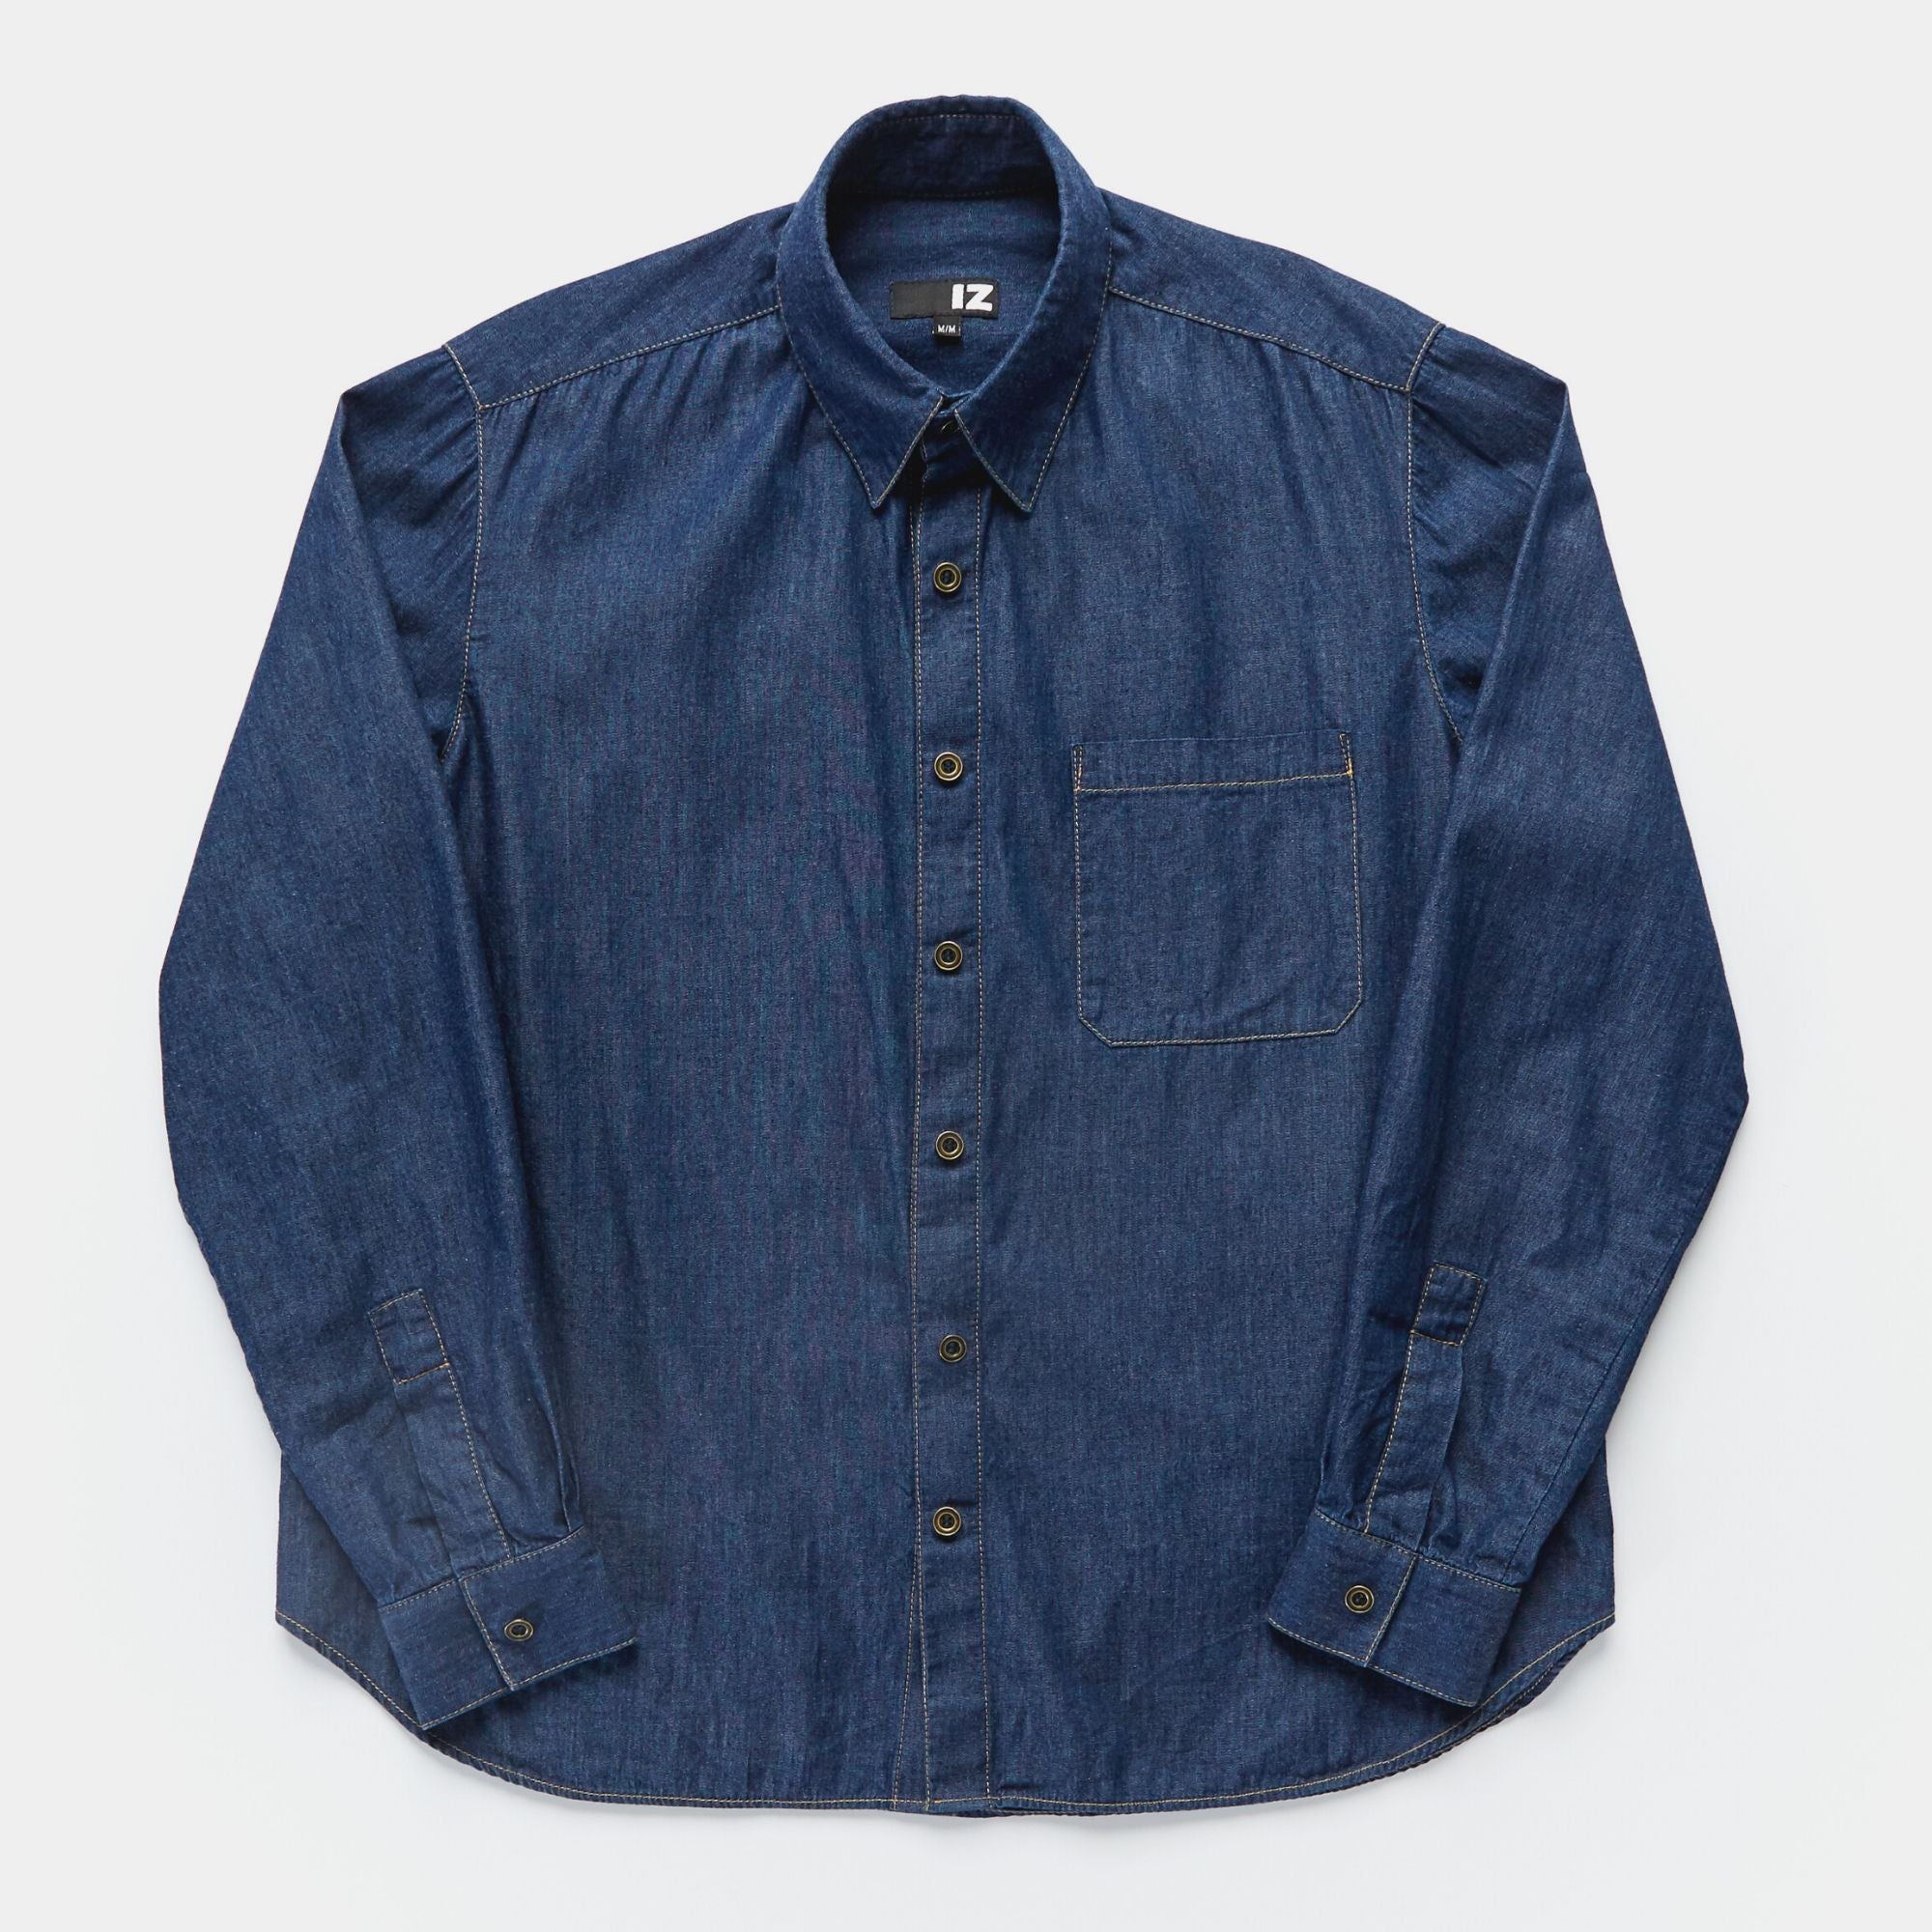 Men's Classic Long Sleeve Denim Shirt with Magnetic Closures